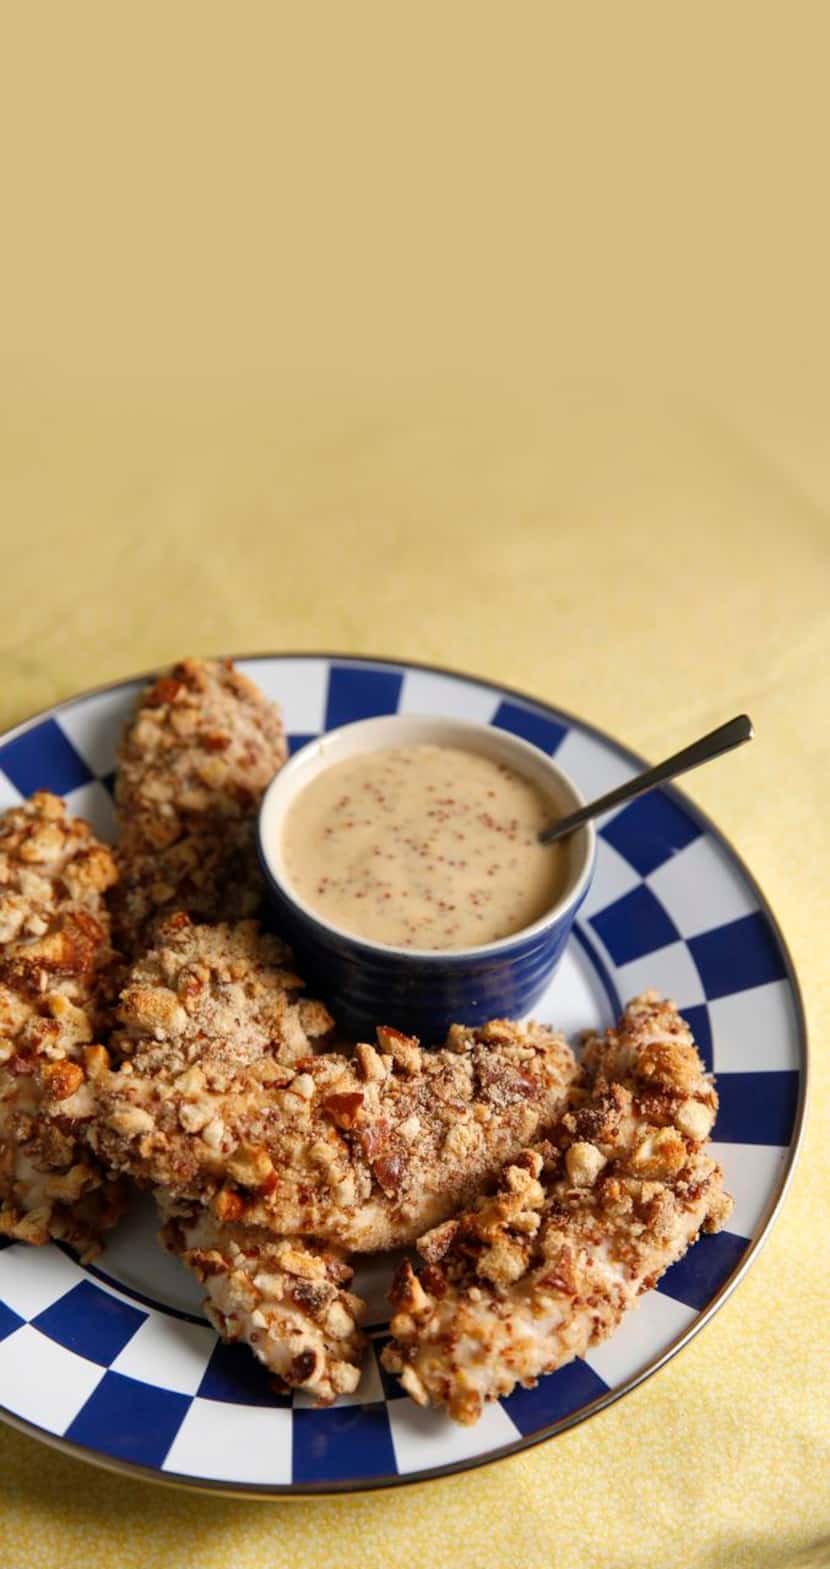 
Tangy mustard-flavored chicken tenders have a tantalizing crunch thanks to hard-baked...